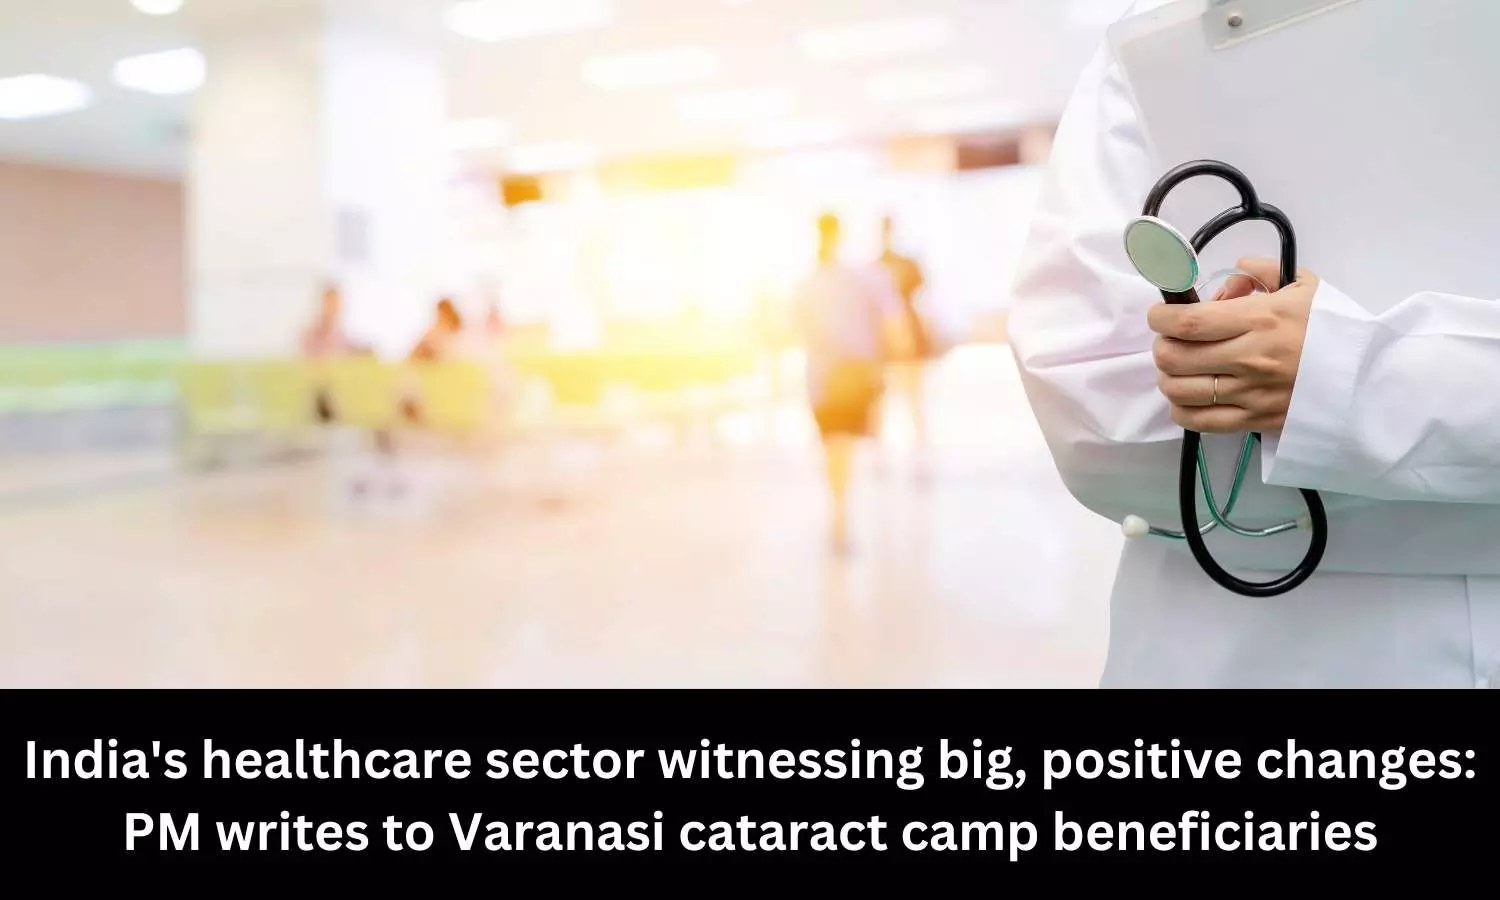 Indian healthcare sector witnessing big, positive changes: PM Modi writes to Varanasi cataract camp beneficiaries